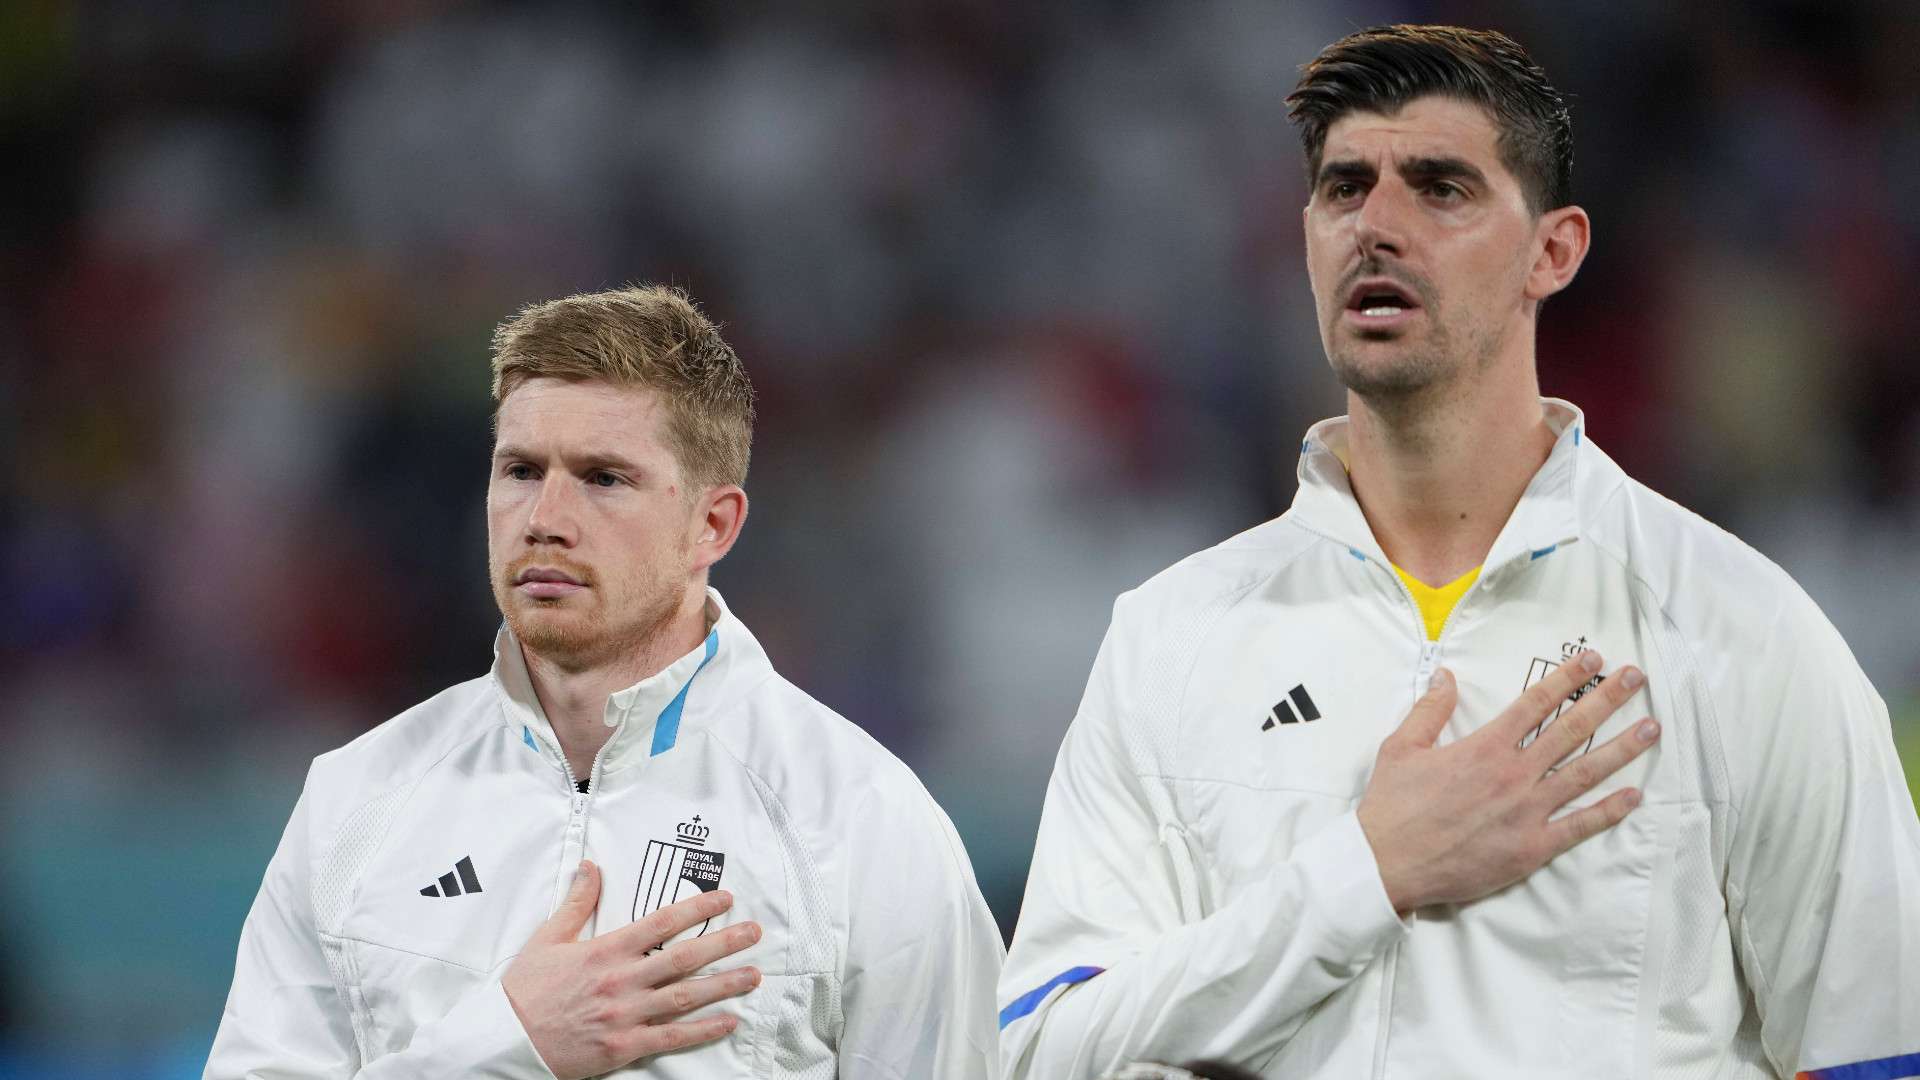 GERMANY ONLY: KEVIN DE BRUYNE THIBAUT COURTOIS